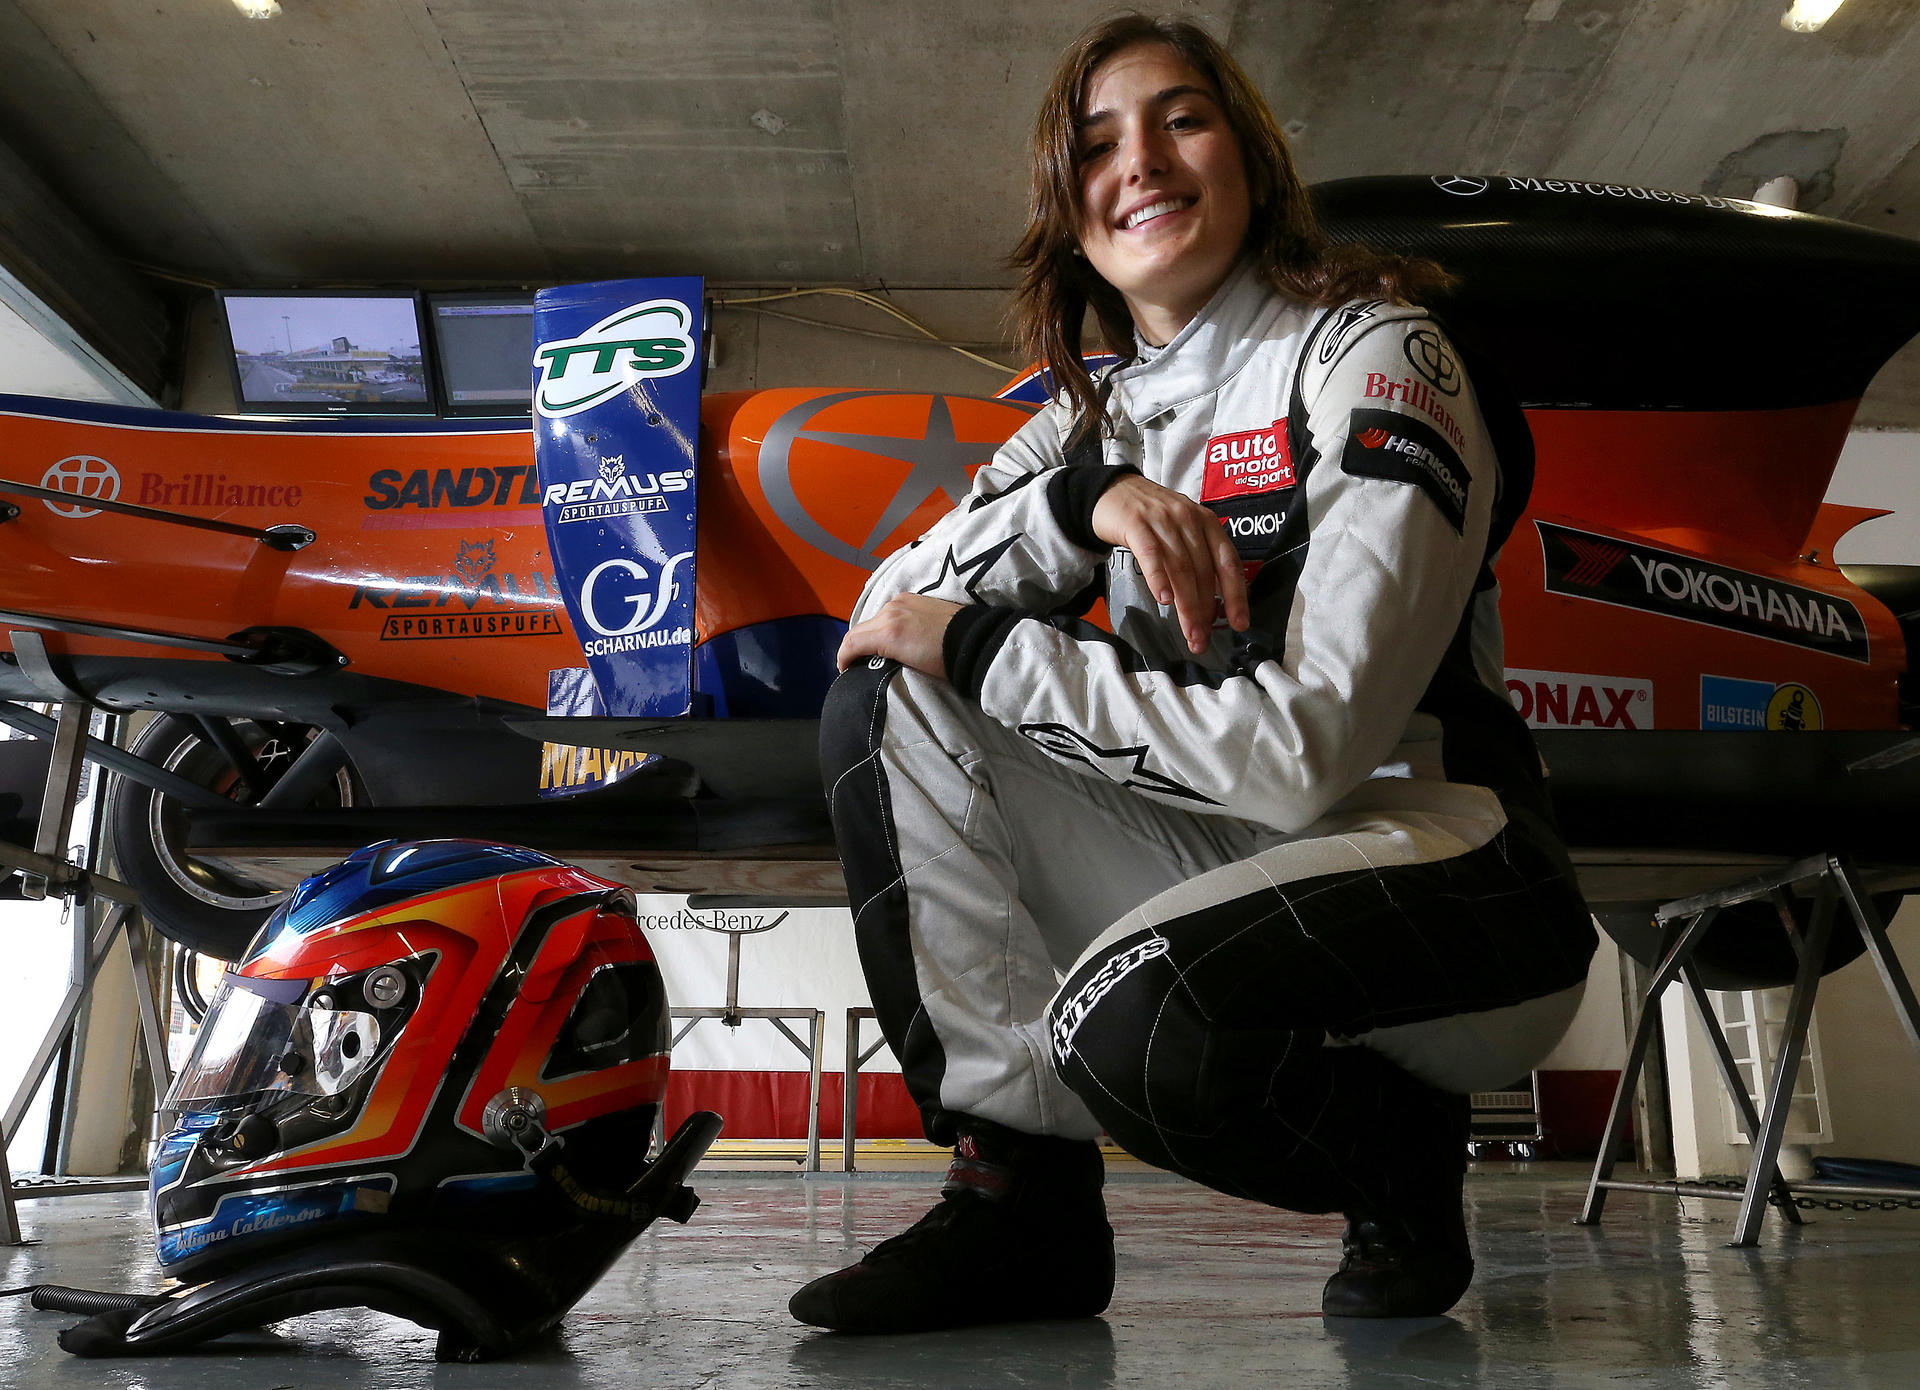 Colombia's Tatiana Calderon is very much at home in the Macau Grand Prix paddocks and hopes for at least a top 10 finish in the F3 race this weekend. Photo: K.Y. Cheng